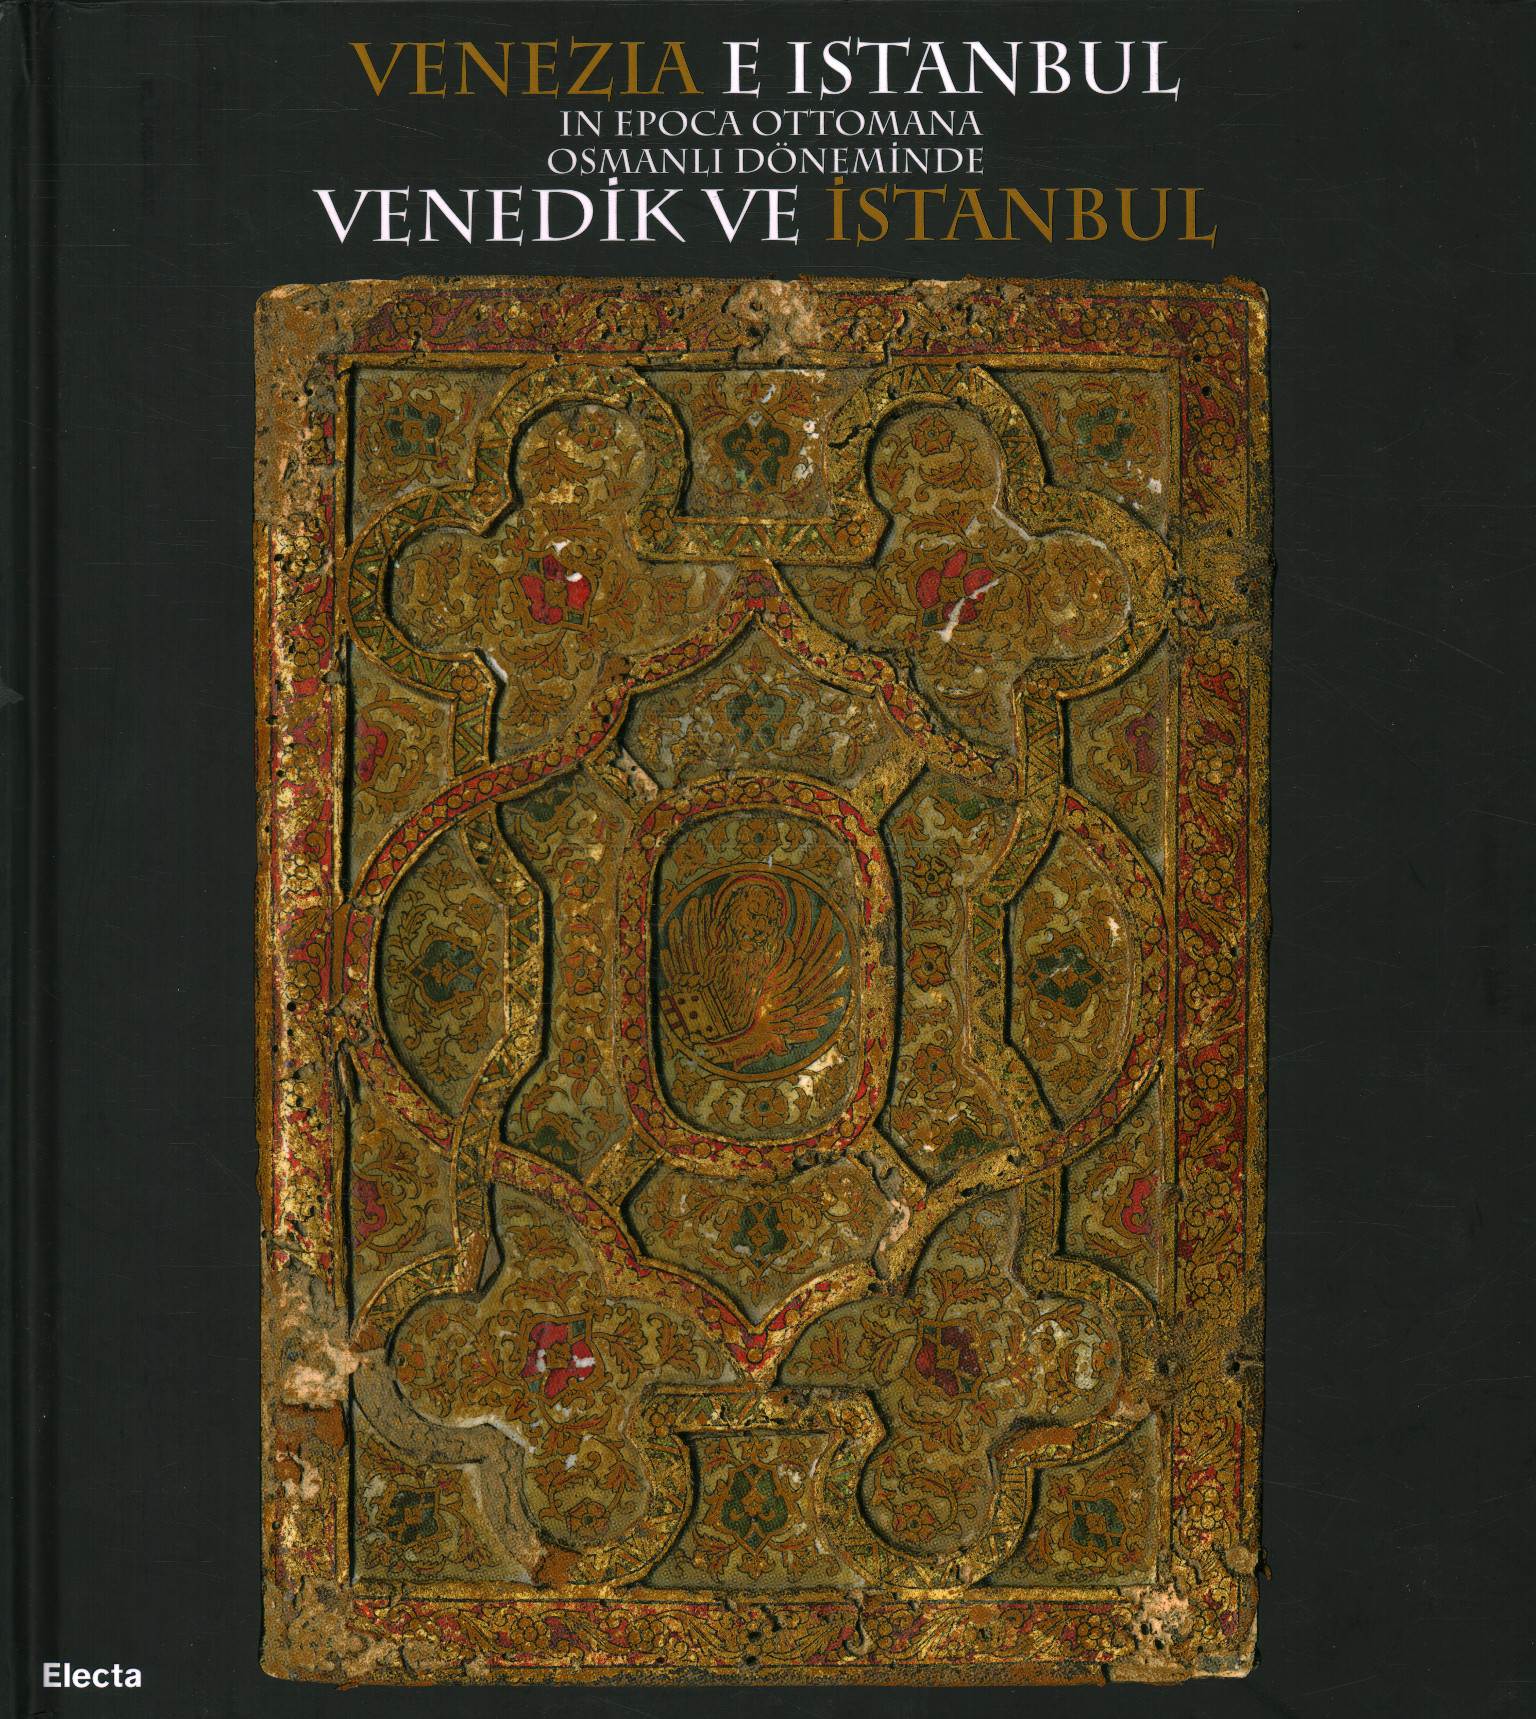 Venice and Istanbul in the Ottoman era